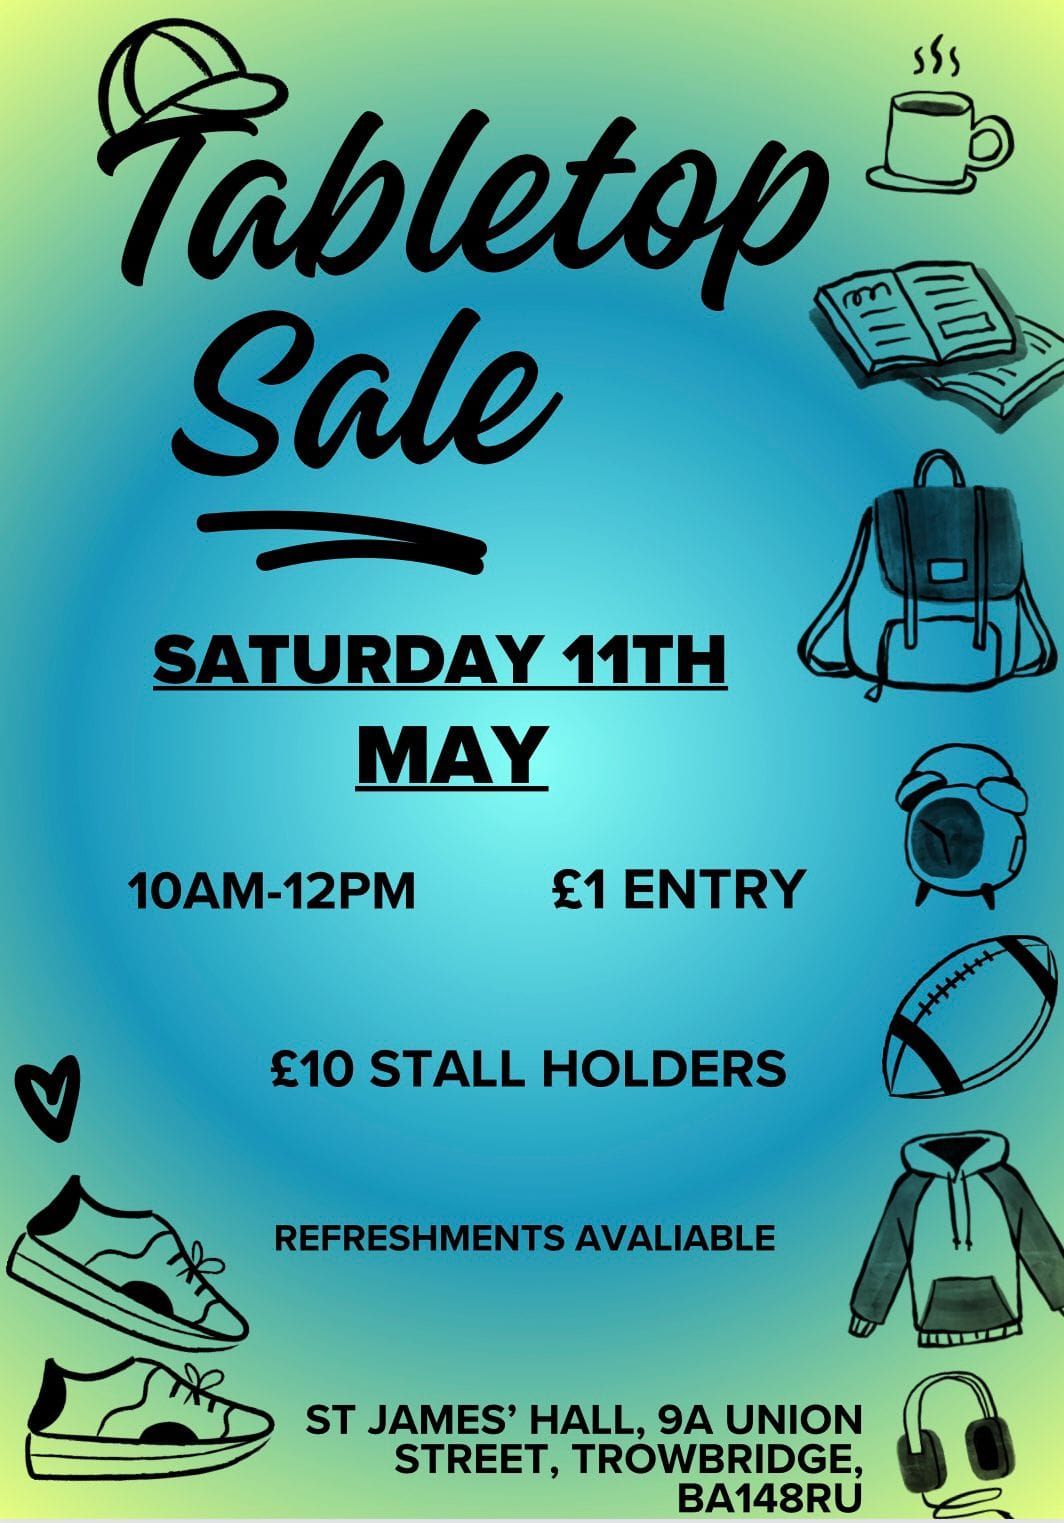 Table Top Sale!